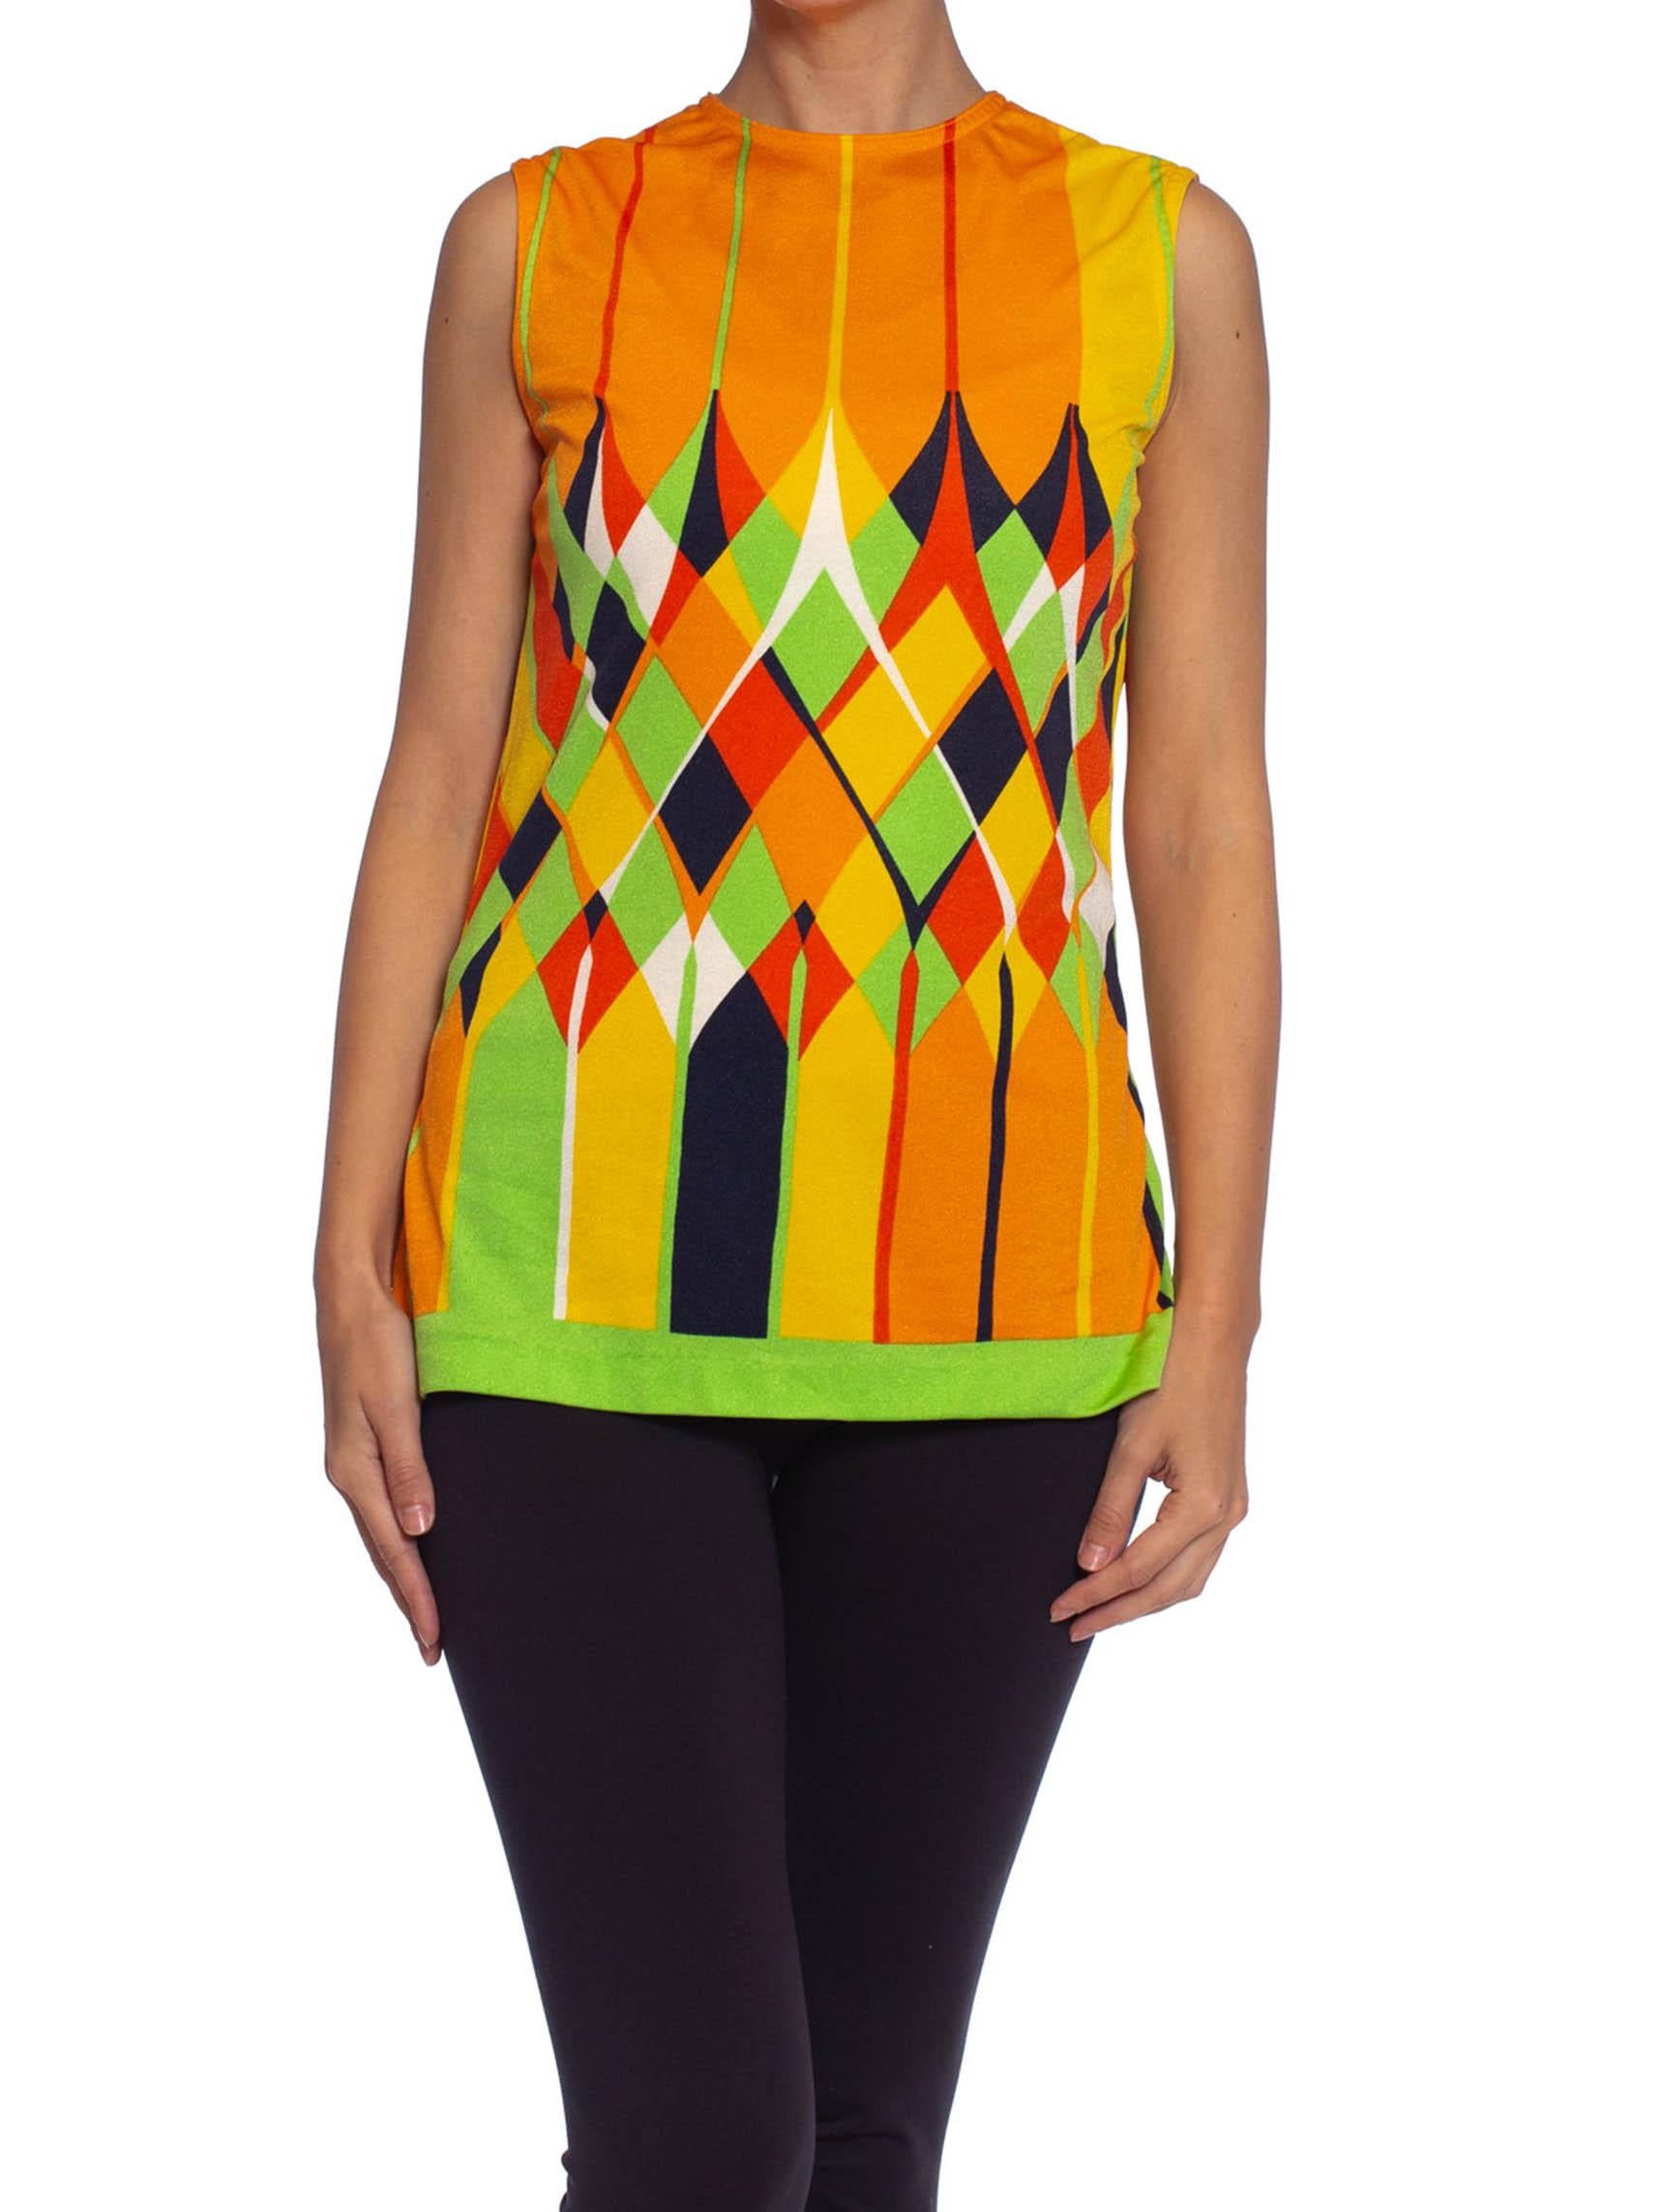 1960S Lime Green & Orange Polyester Jersey Mod Shell Top 3